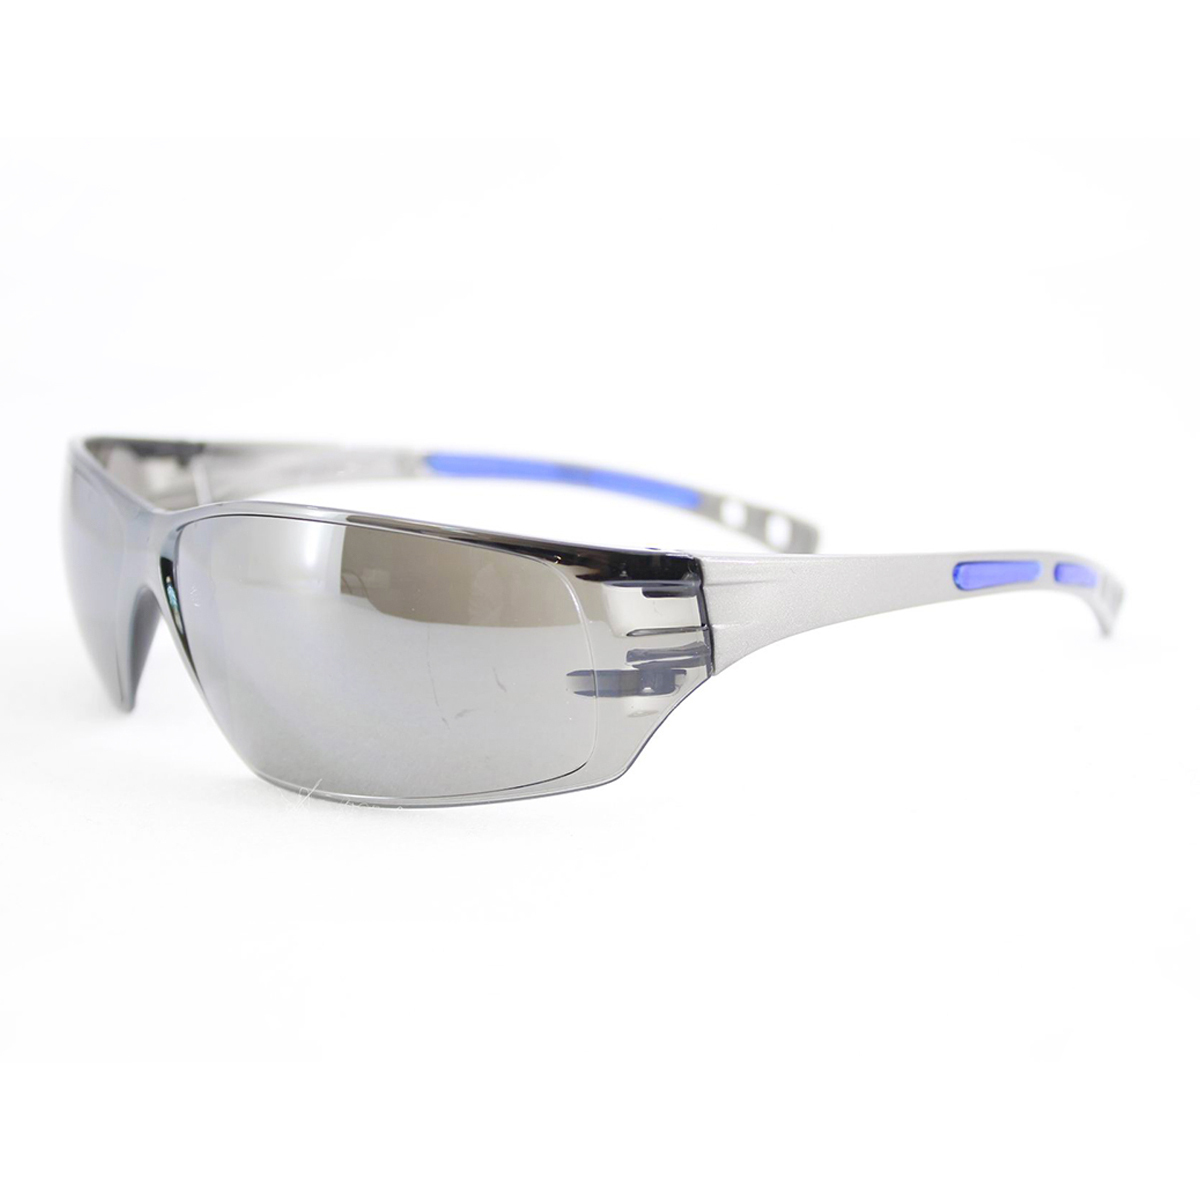 RADNOR® Cobalt Classic Silver Frameless Safety Glasses With Silver Polycarbonate Anti-Scratch Lens And Flexible Cushioned Temple